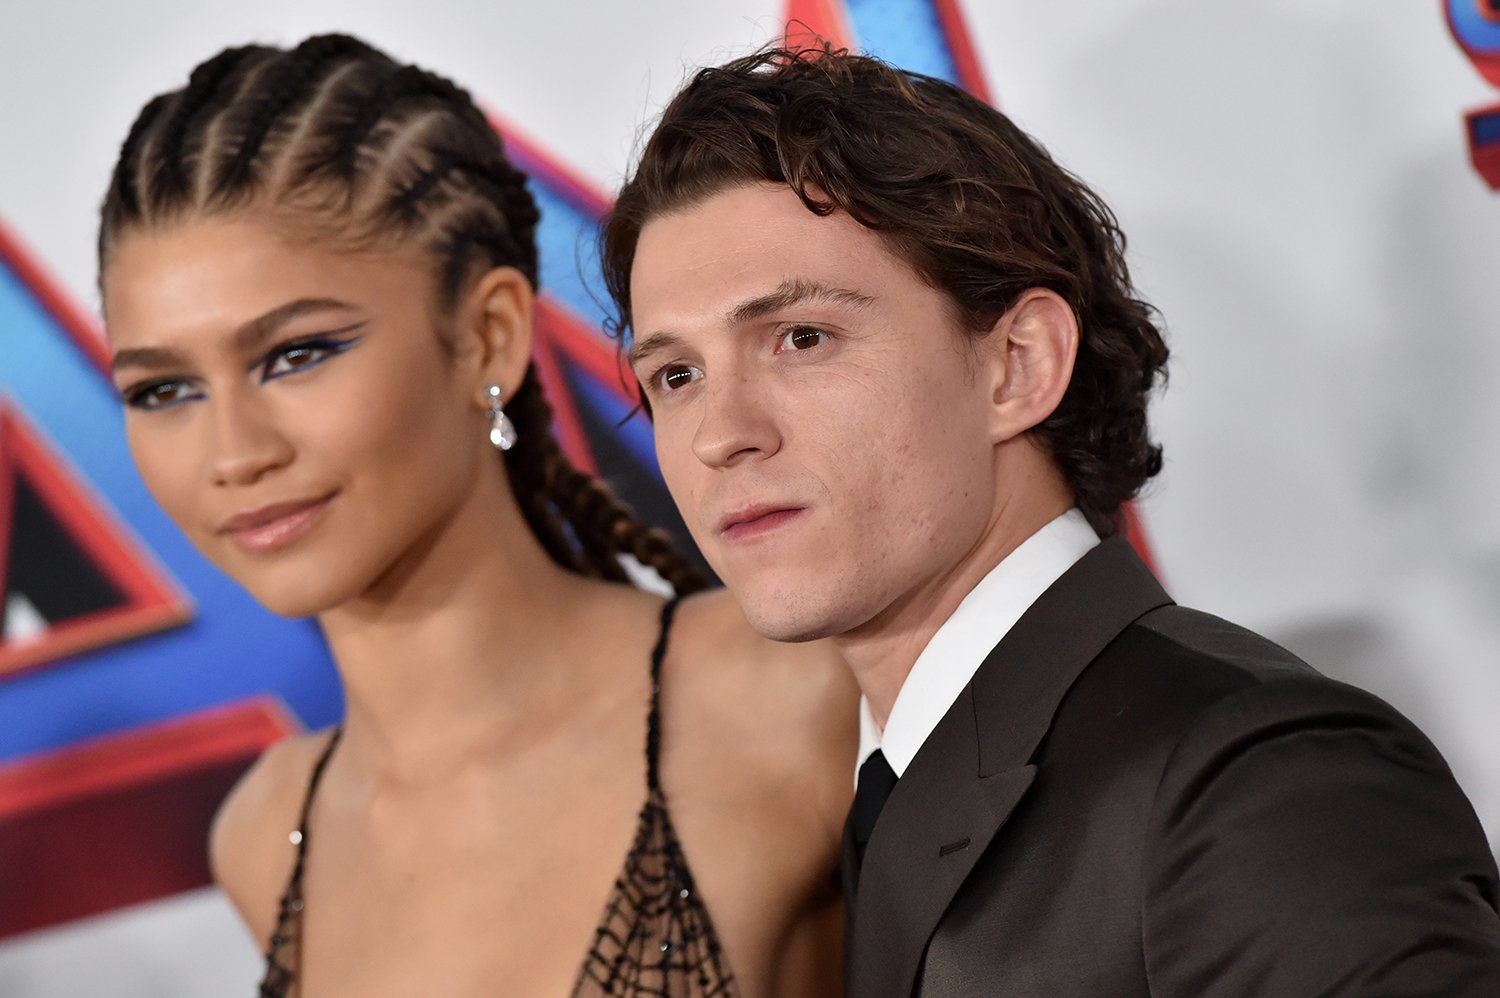 Zendaya and Uncharted star Tom Holland at the Spider-Man: No Way Home premiere in Los Angeles